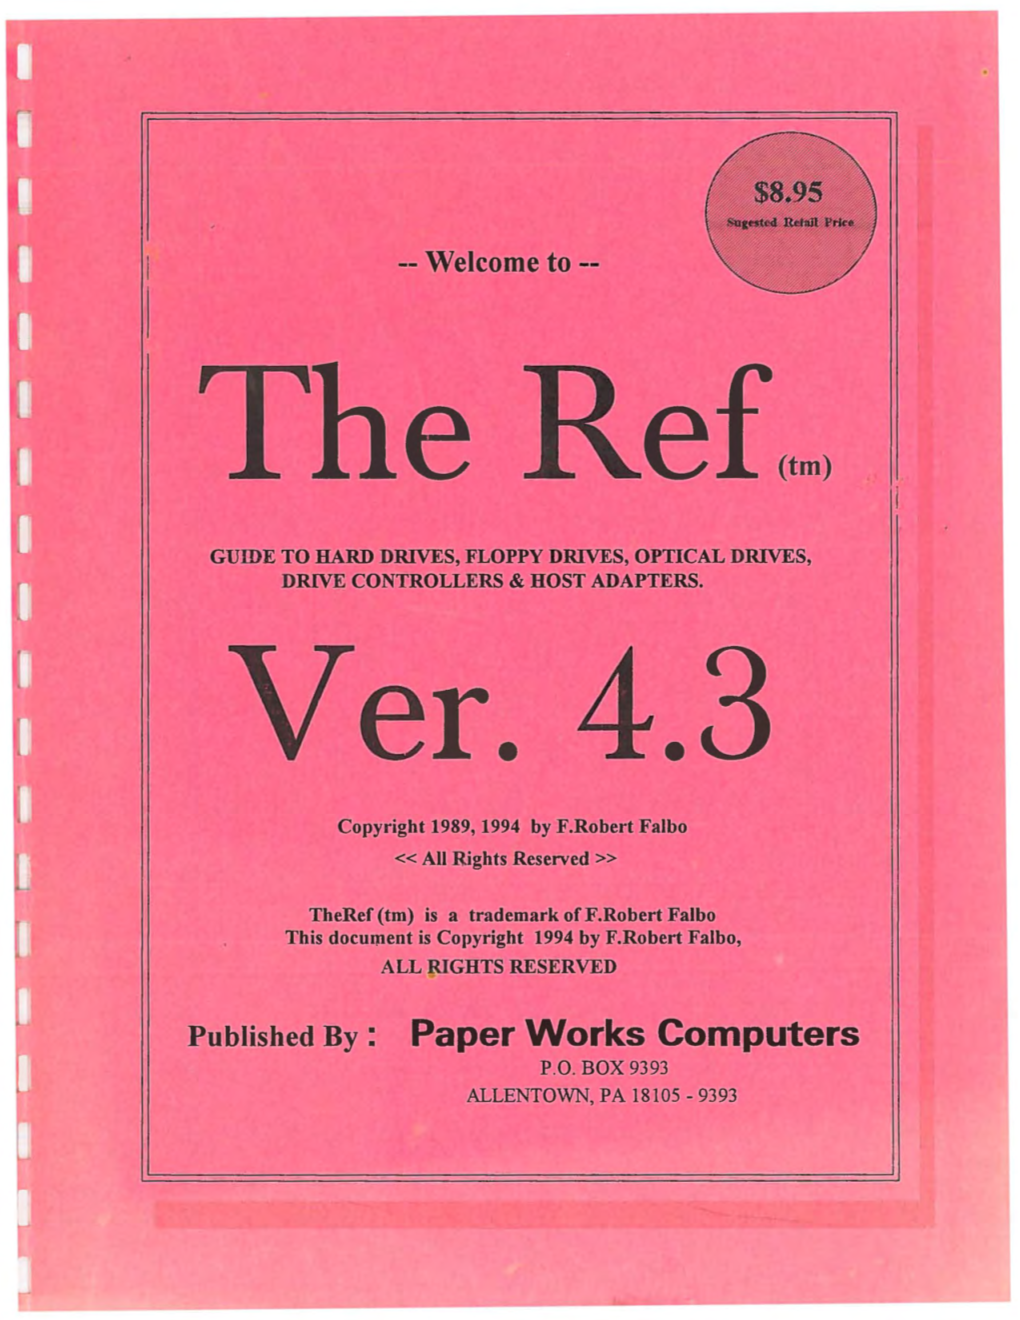 Published by : Paper Works Computers P.O